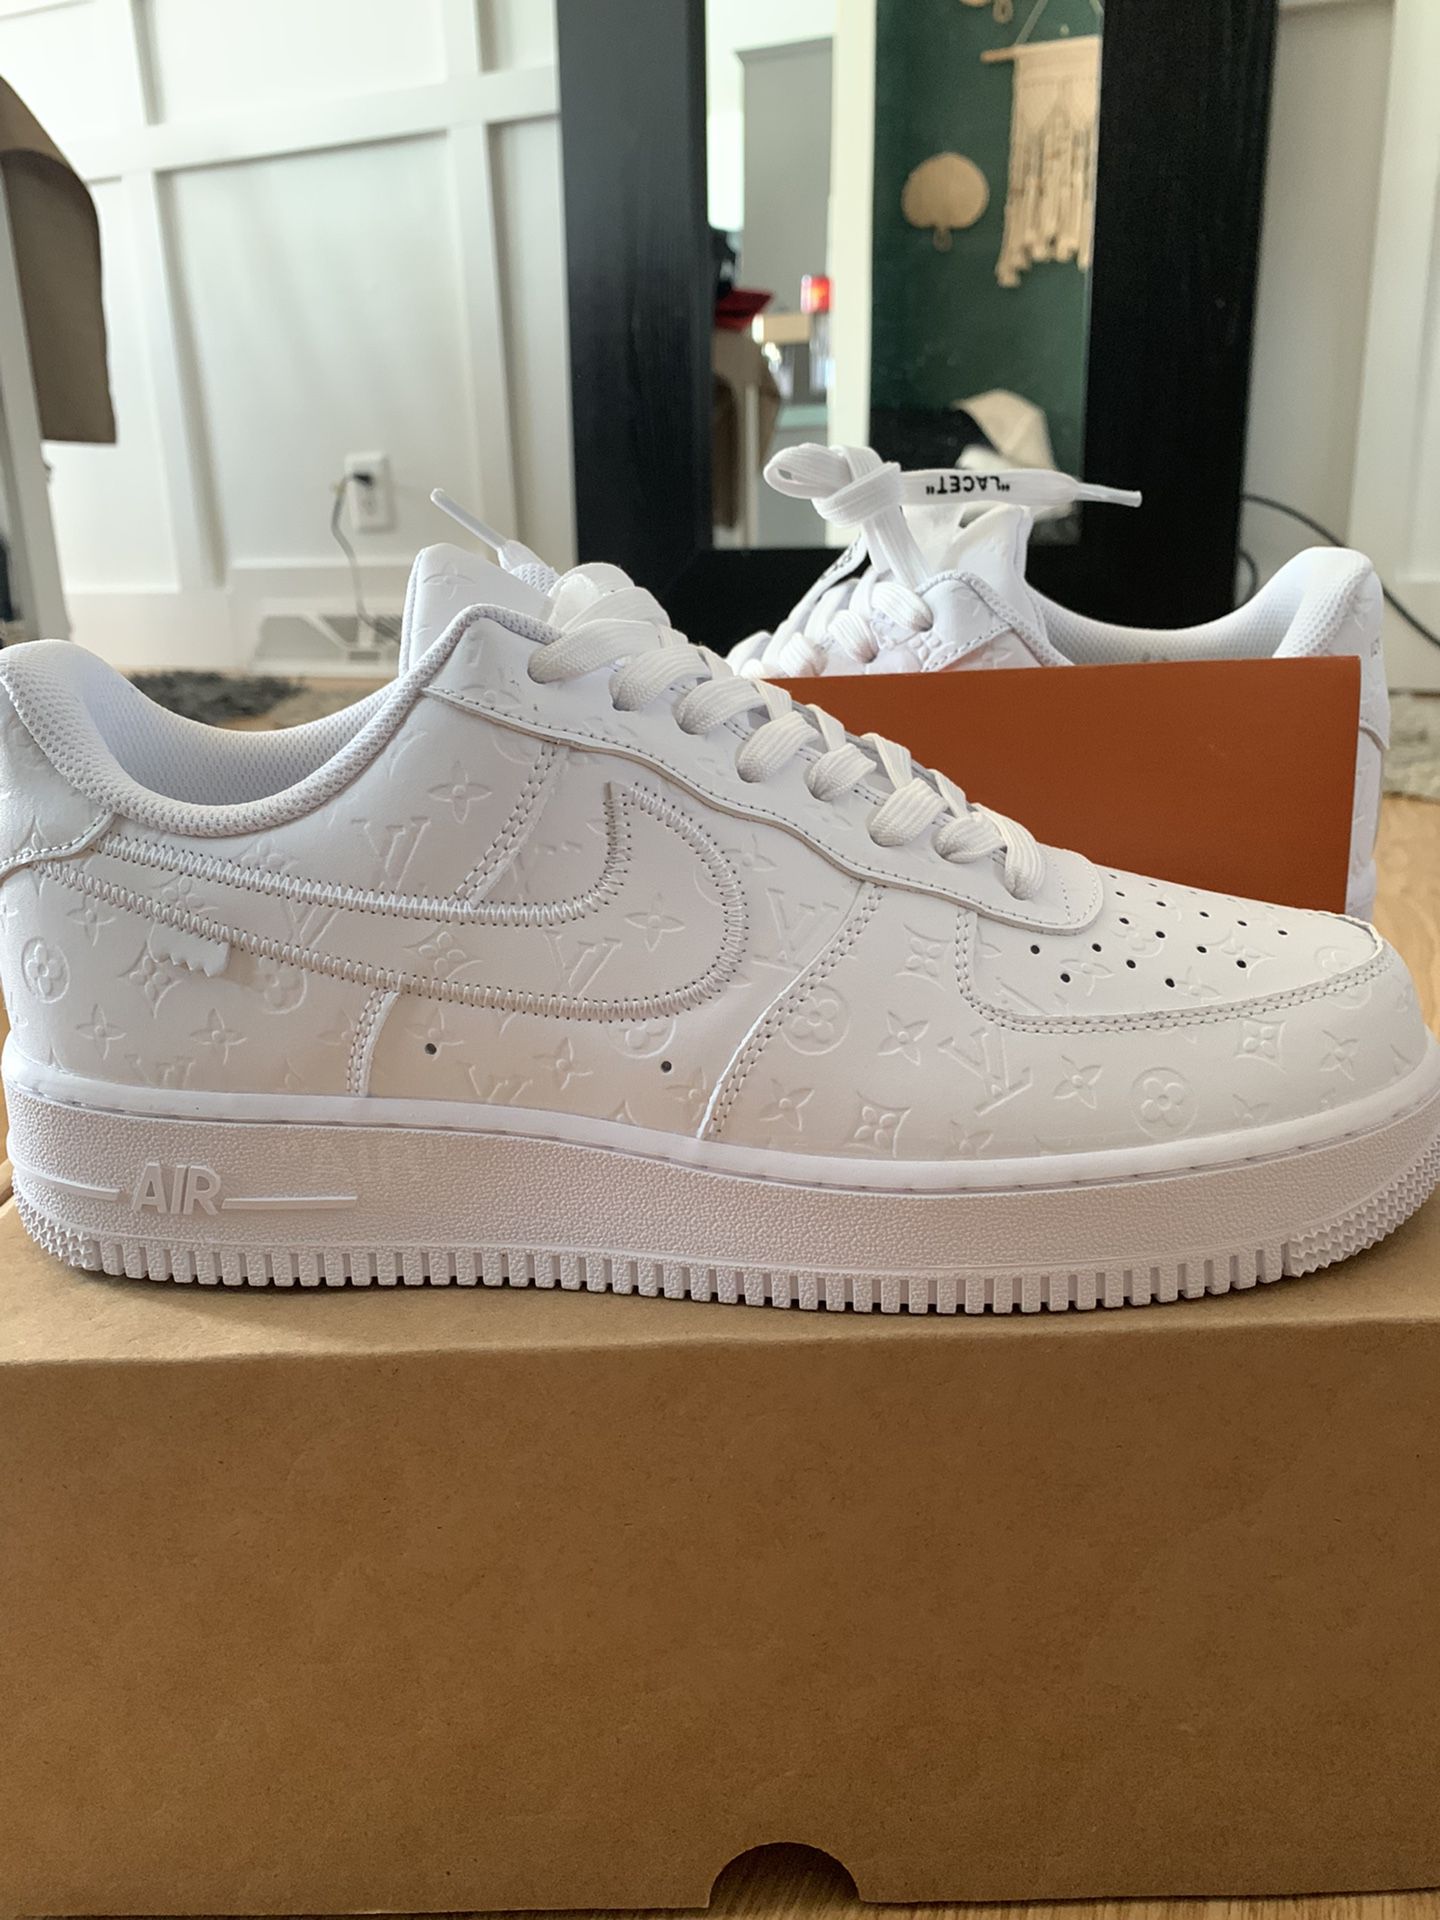 Louis Vuitton Off White Air Force Collab for Sale in White Oak, MD